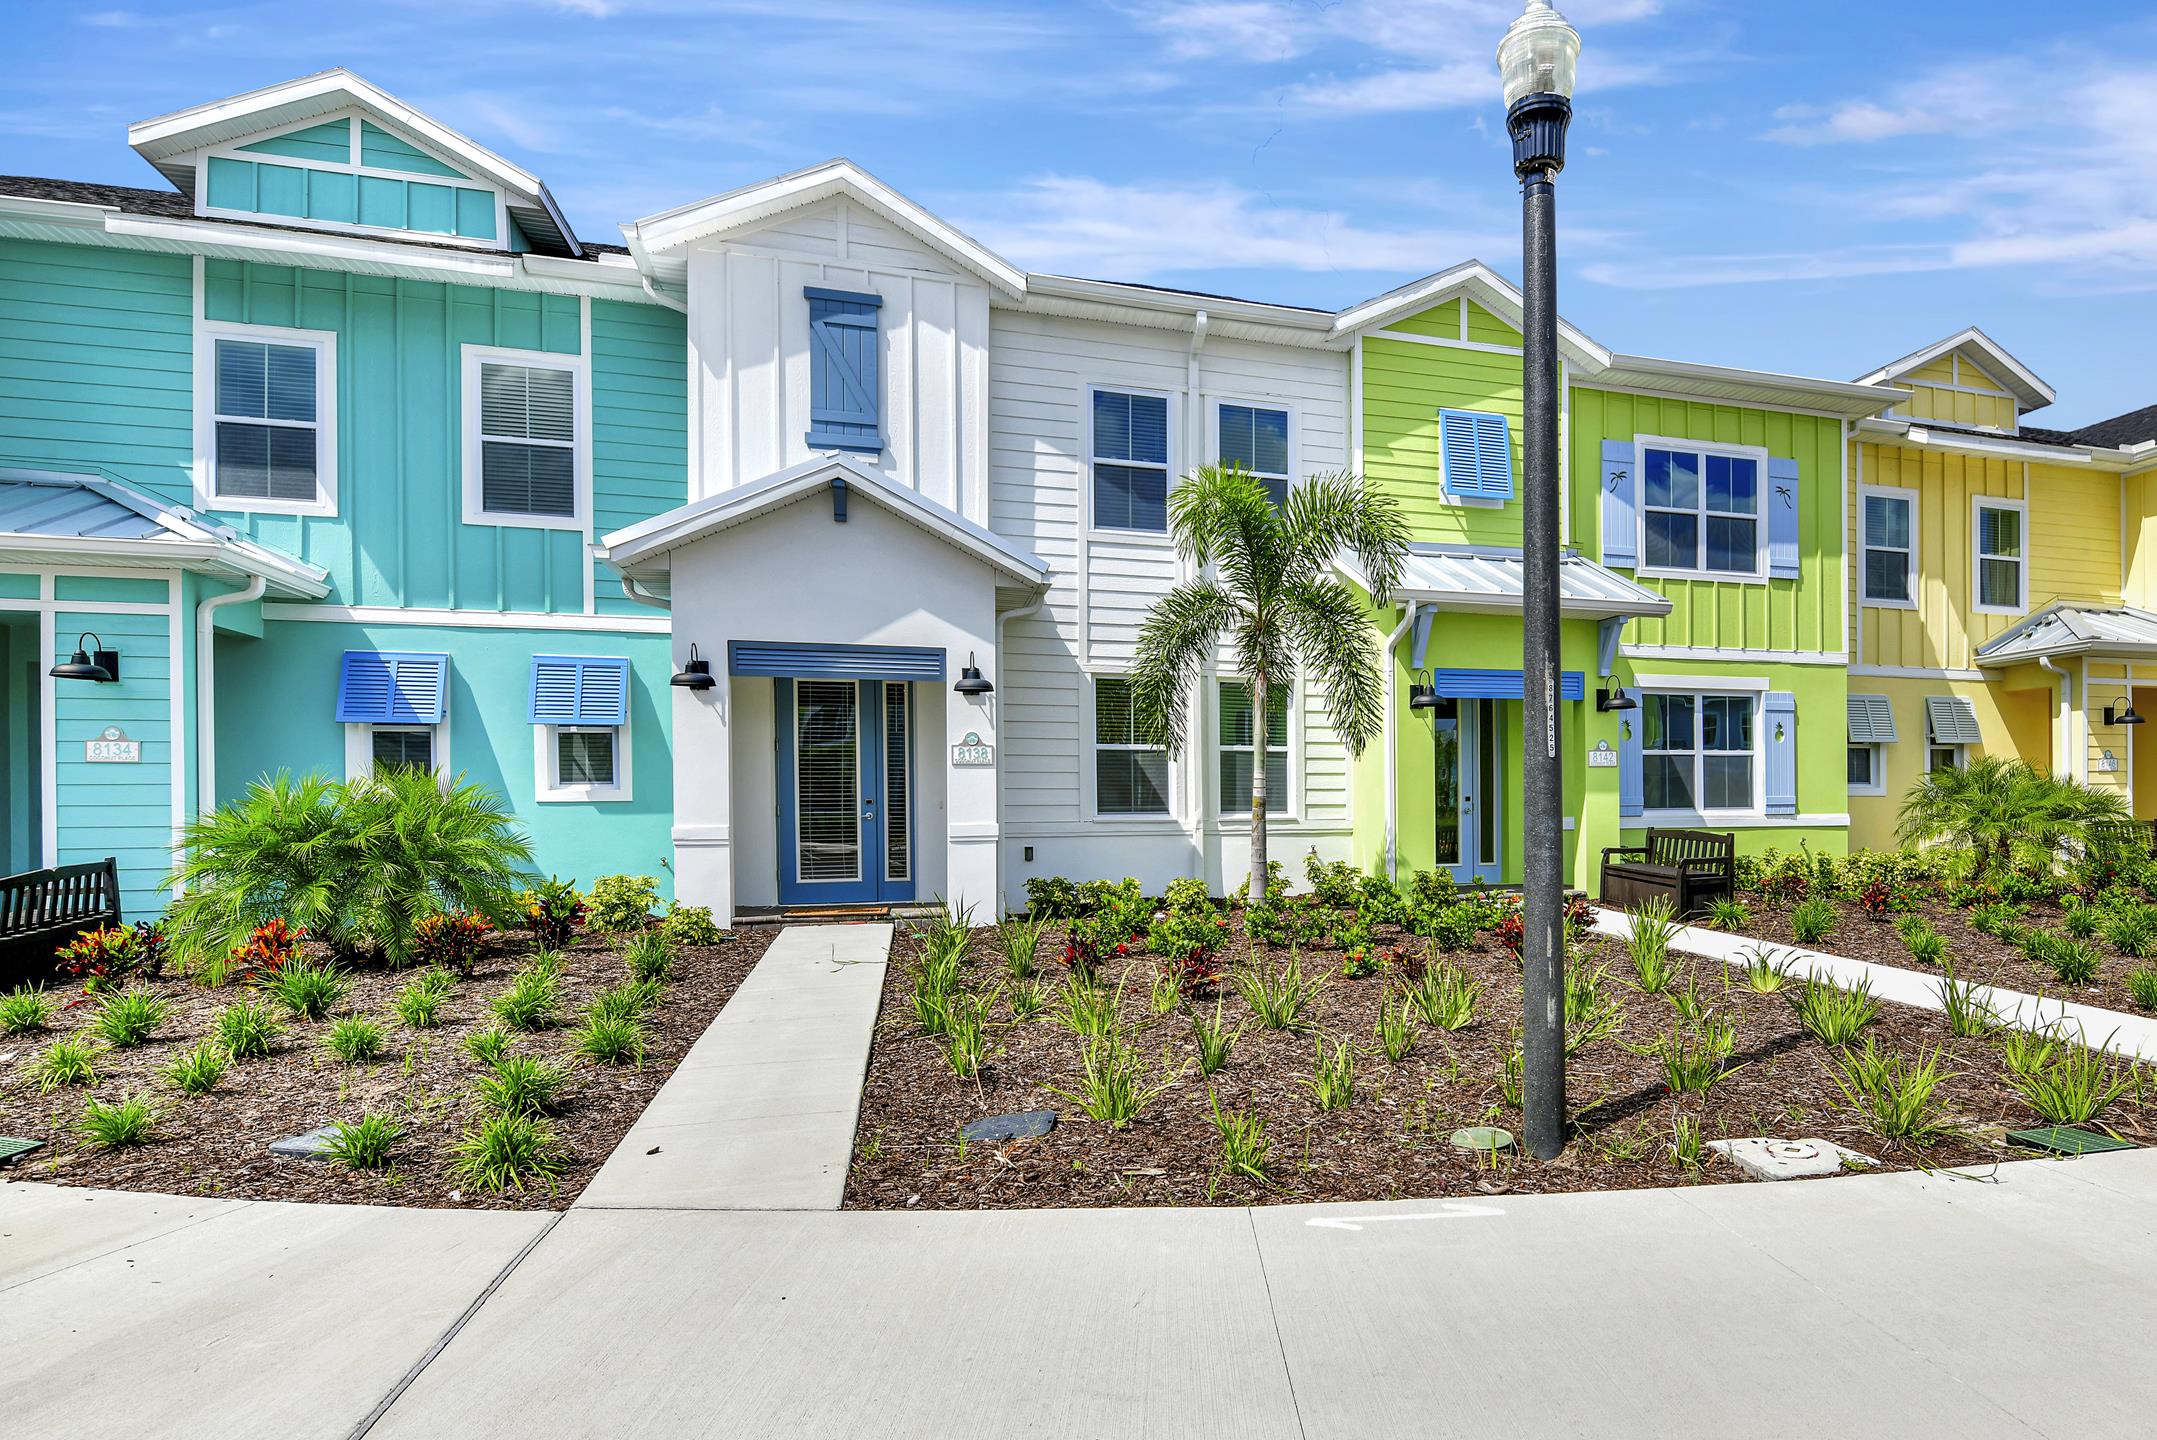 Property Image 1 - Relaxing Villa near Disney with Margaritaville Resort Access - 8138CP